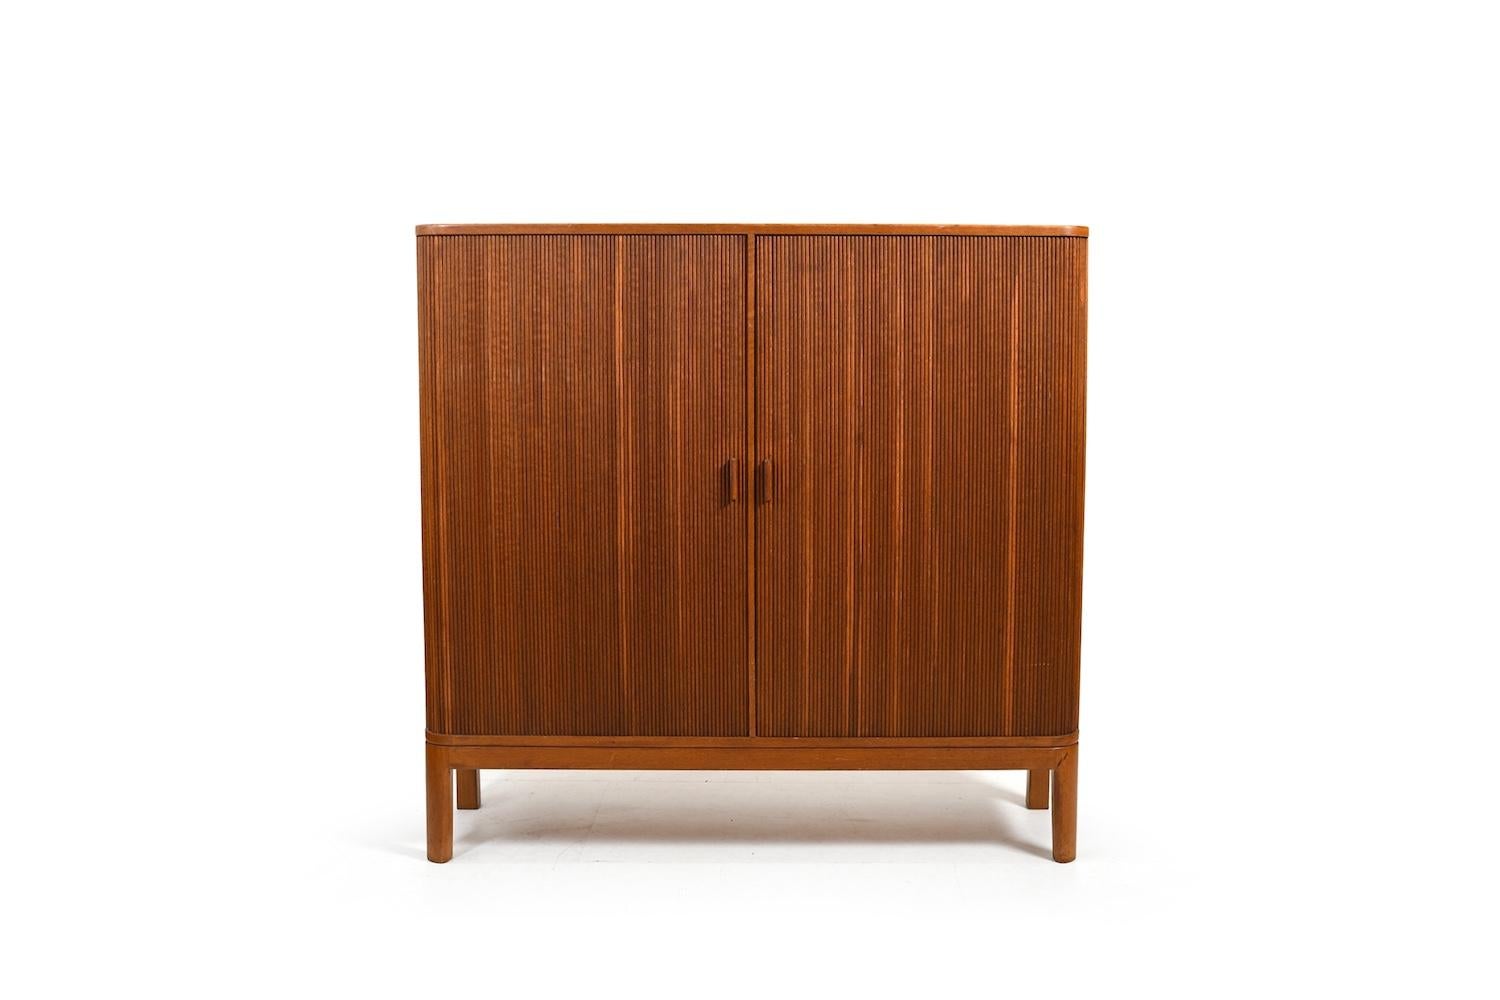 Danish tambour doors teak cabinet with birch drawers and shelfes inside. (3 shelves included, forgot to use when taking photos ). In very good quality and condition. Denmark 1950s.